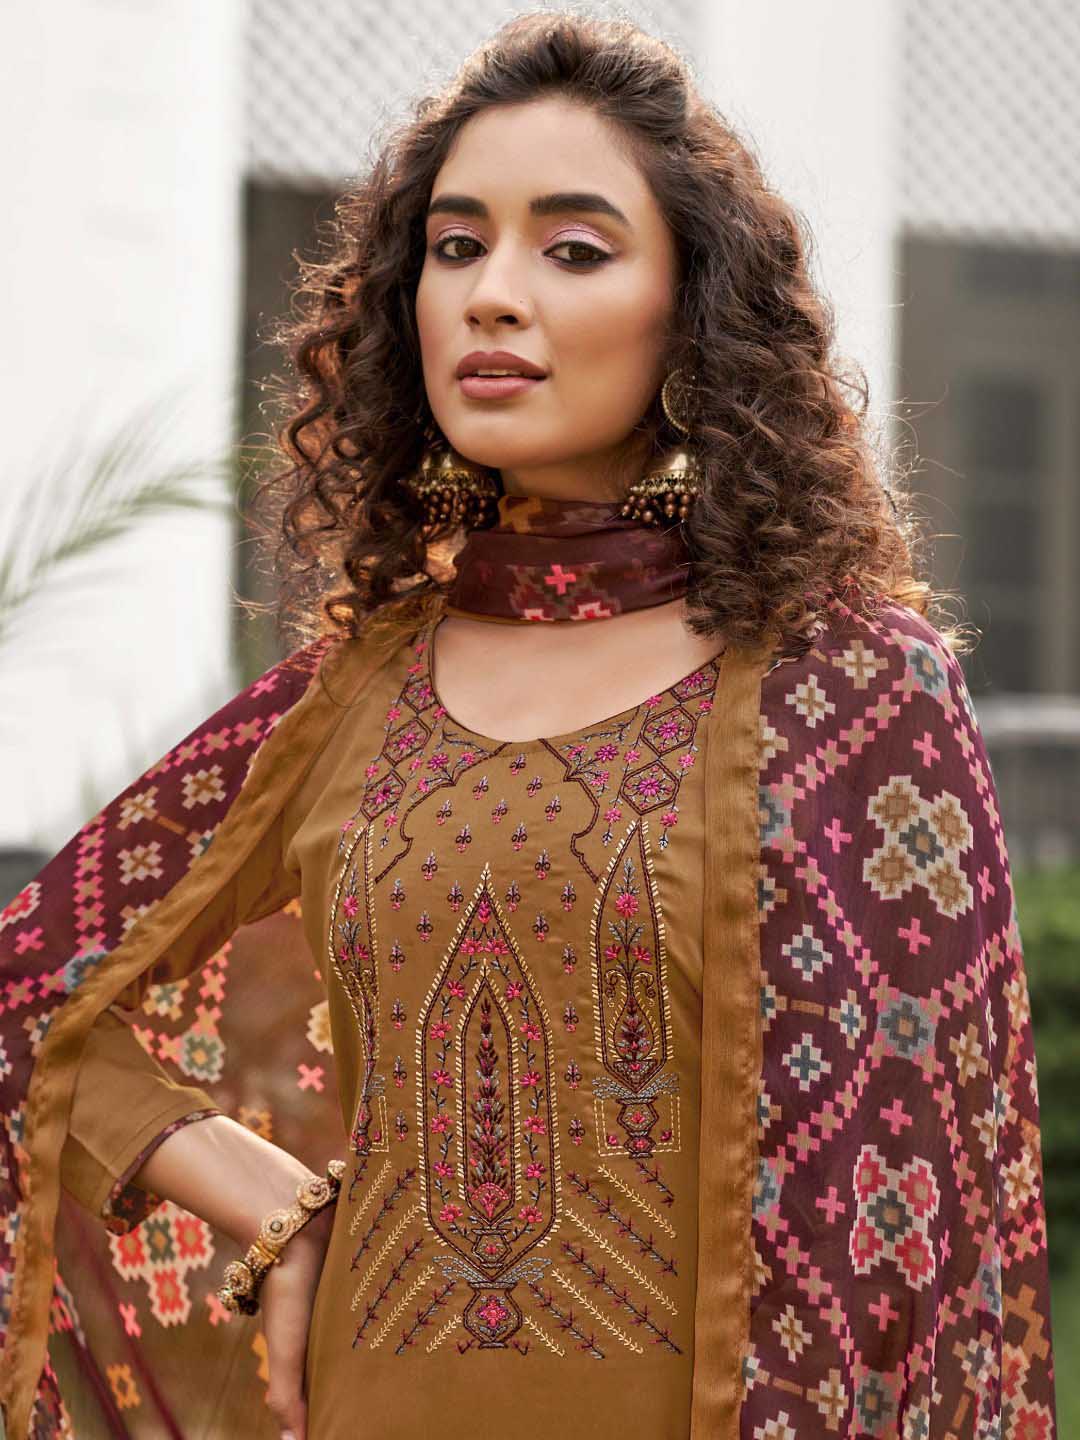 Unstitched Cotton Salwar Suit Brown Dress Material with Embroidery Zulfat